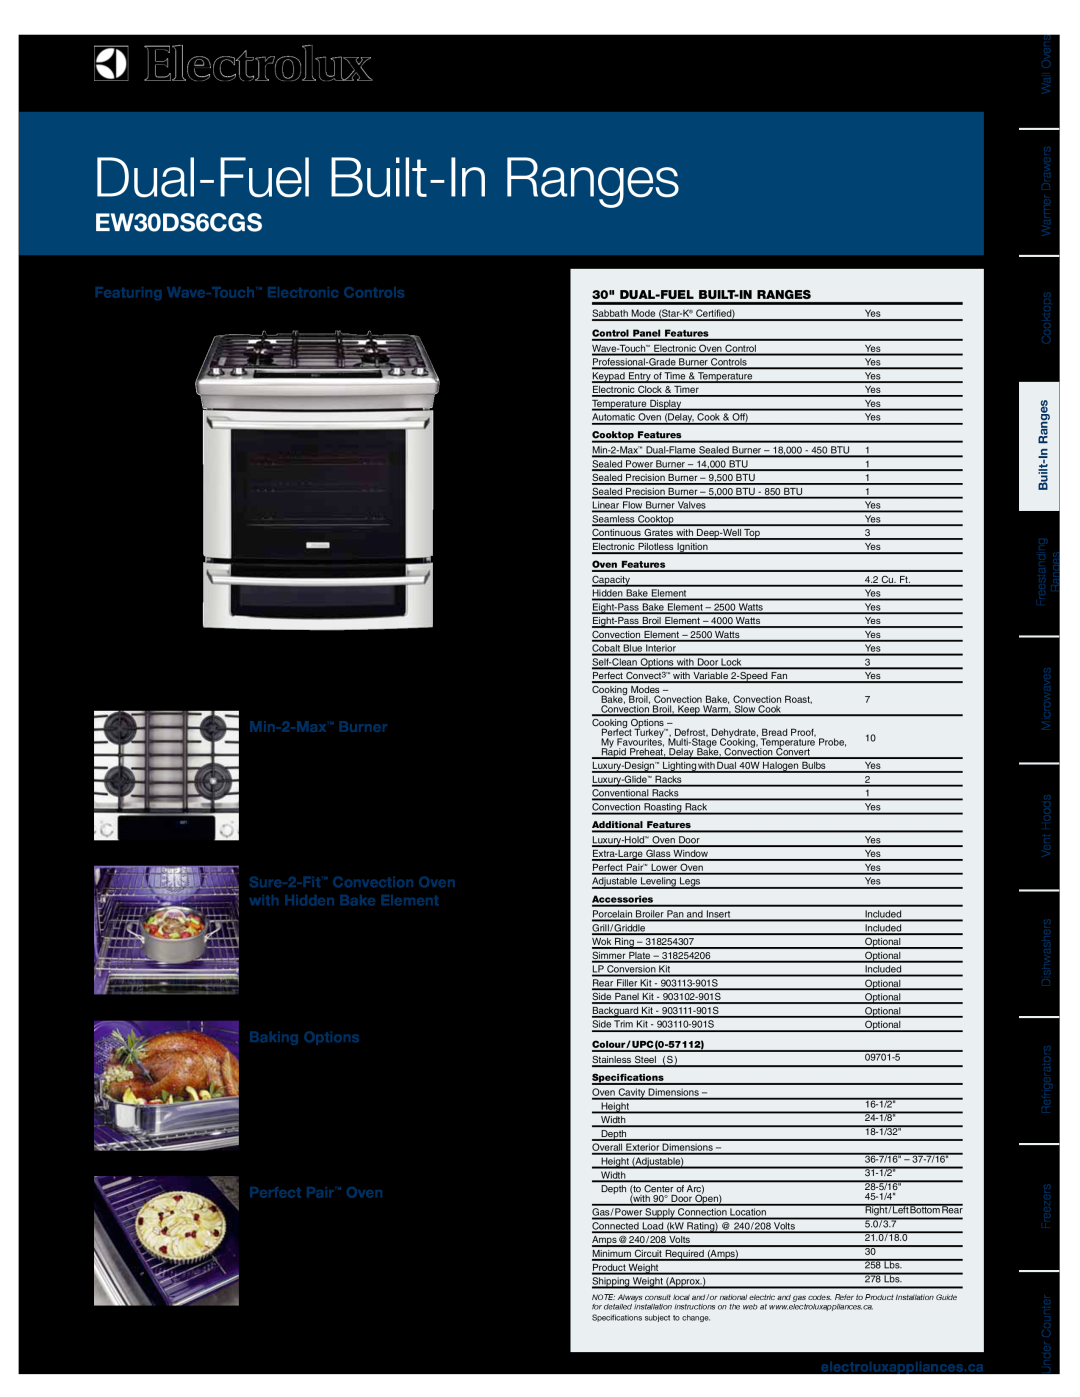 Electrolux EW30DS6CGS specifications Featuring Wave-Touch Electronic Controls Min-2-Max Burner, Baking Options 